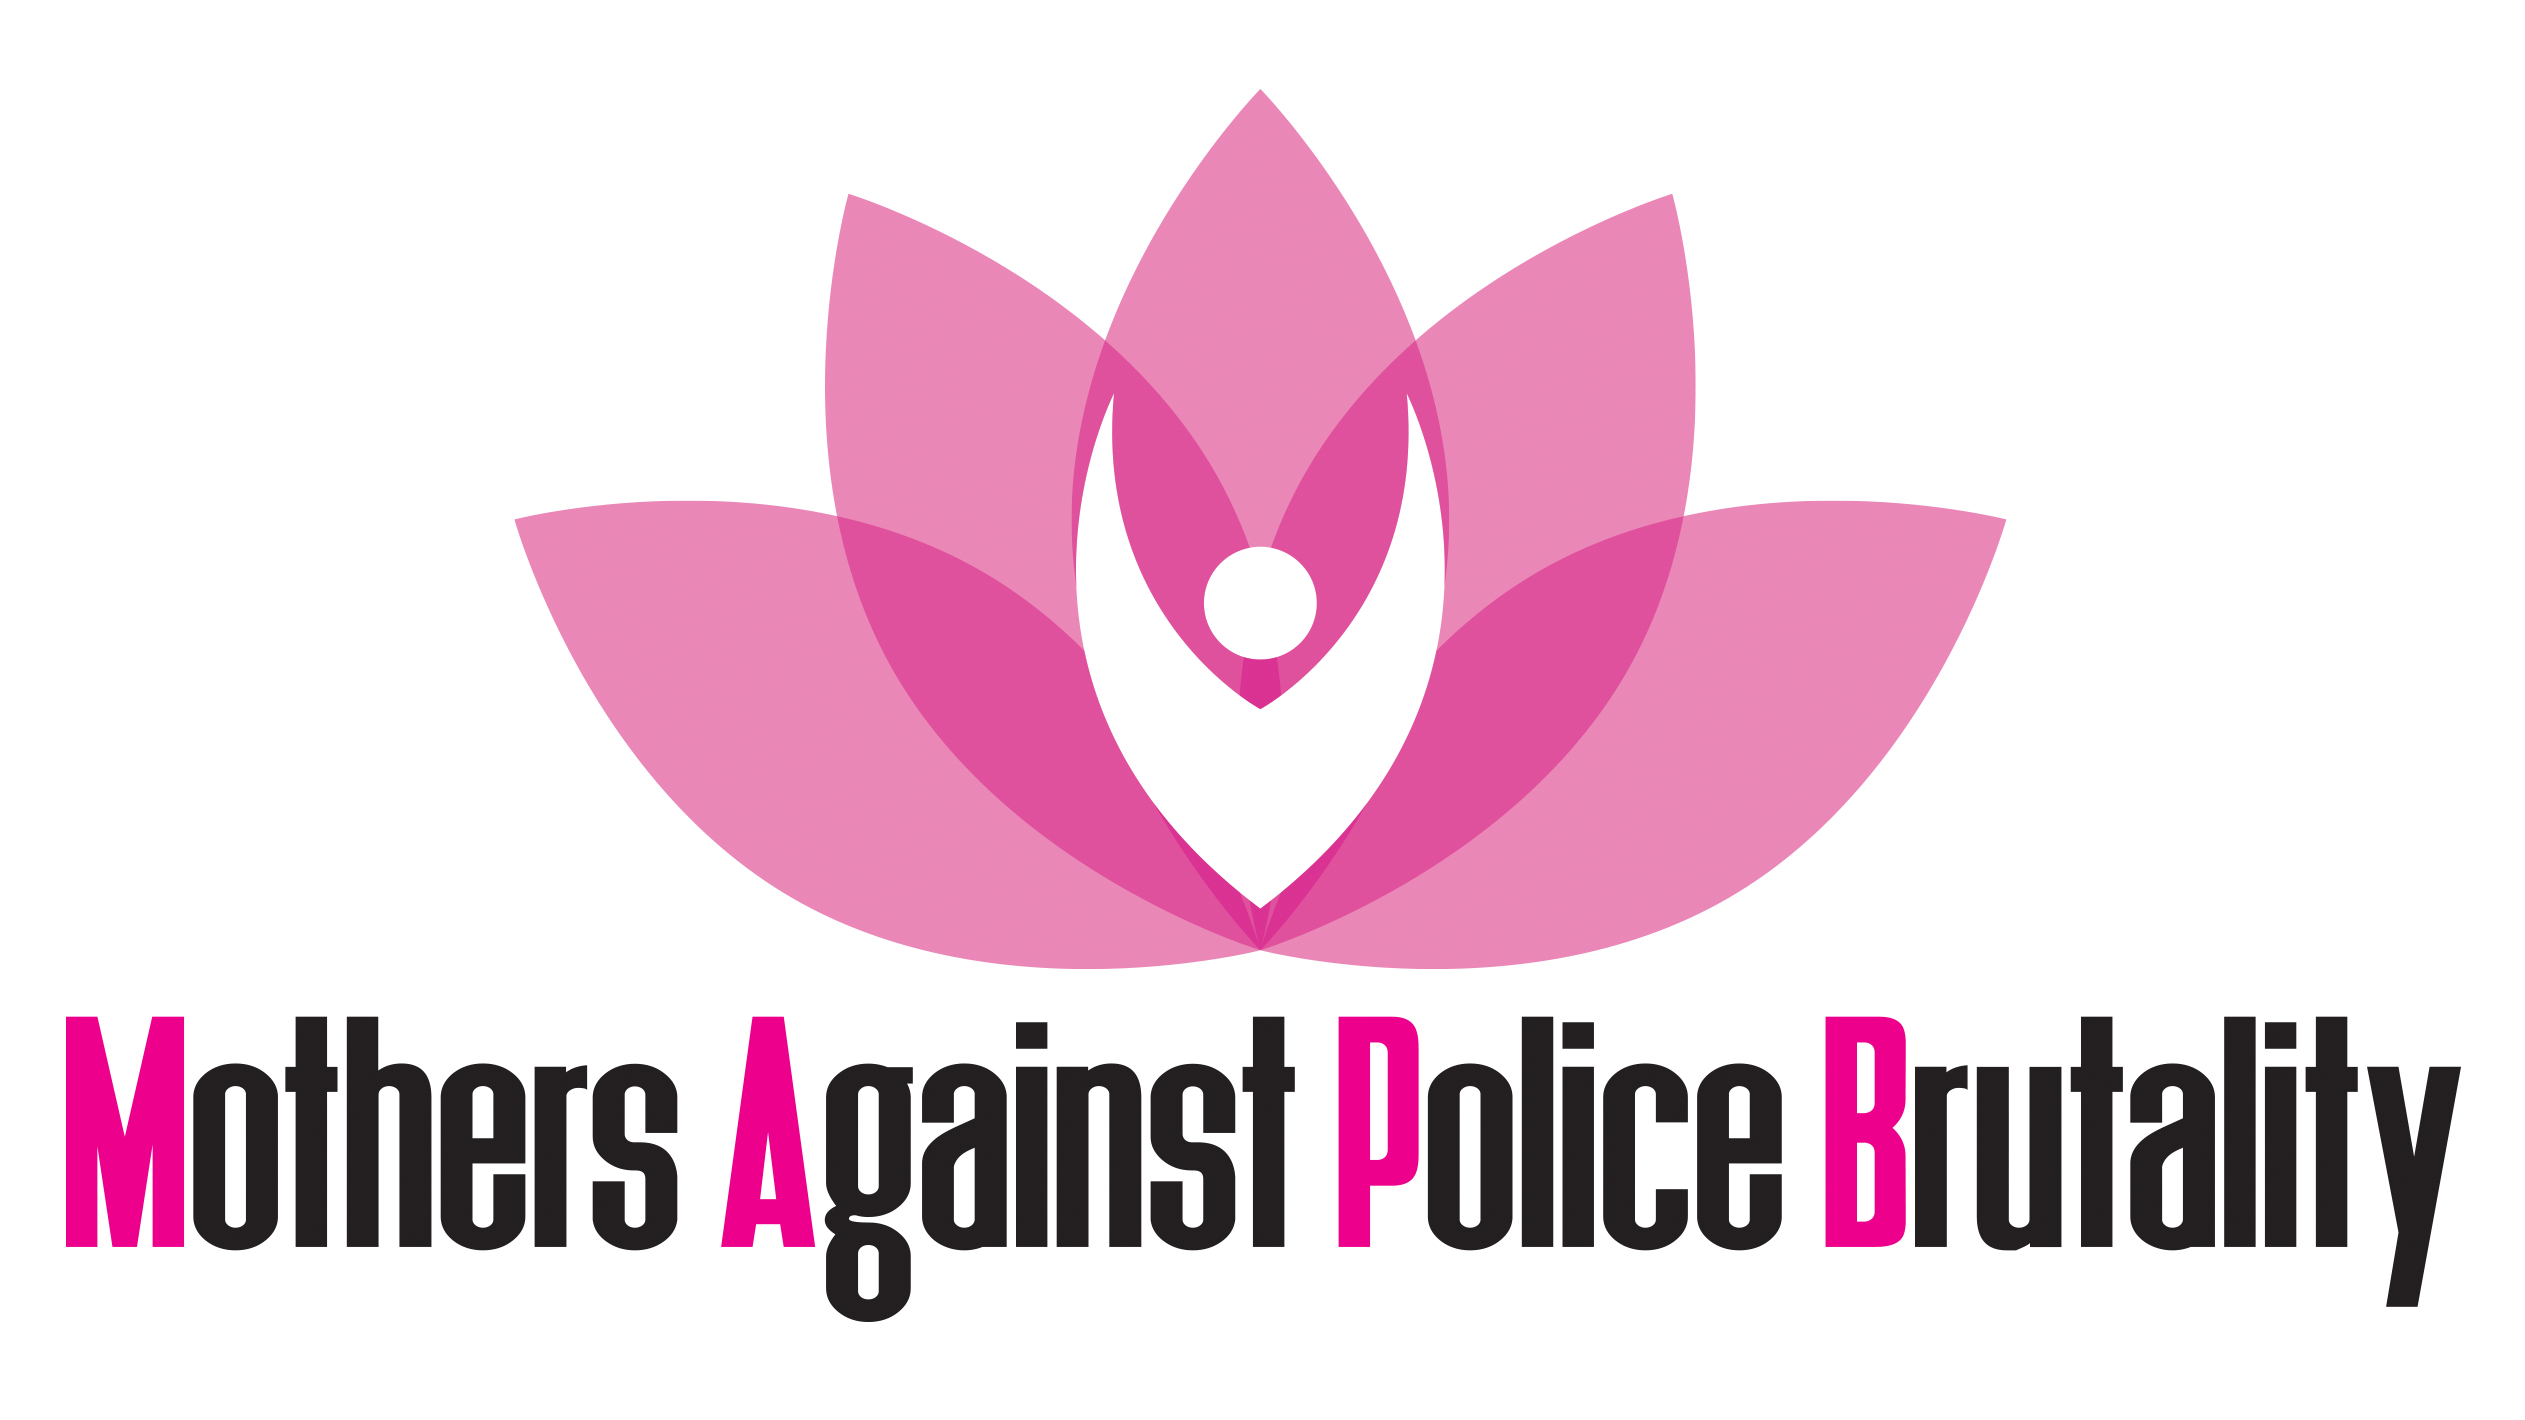 Mothers Against Police Brutality logo